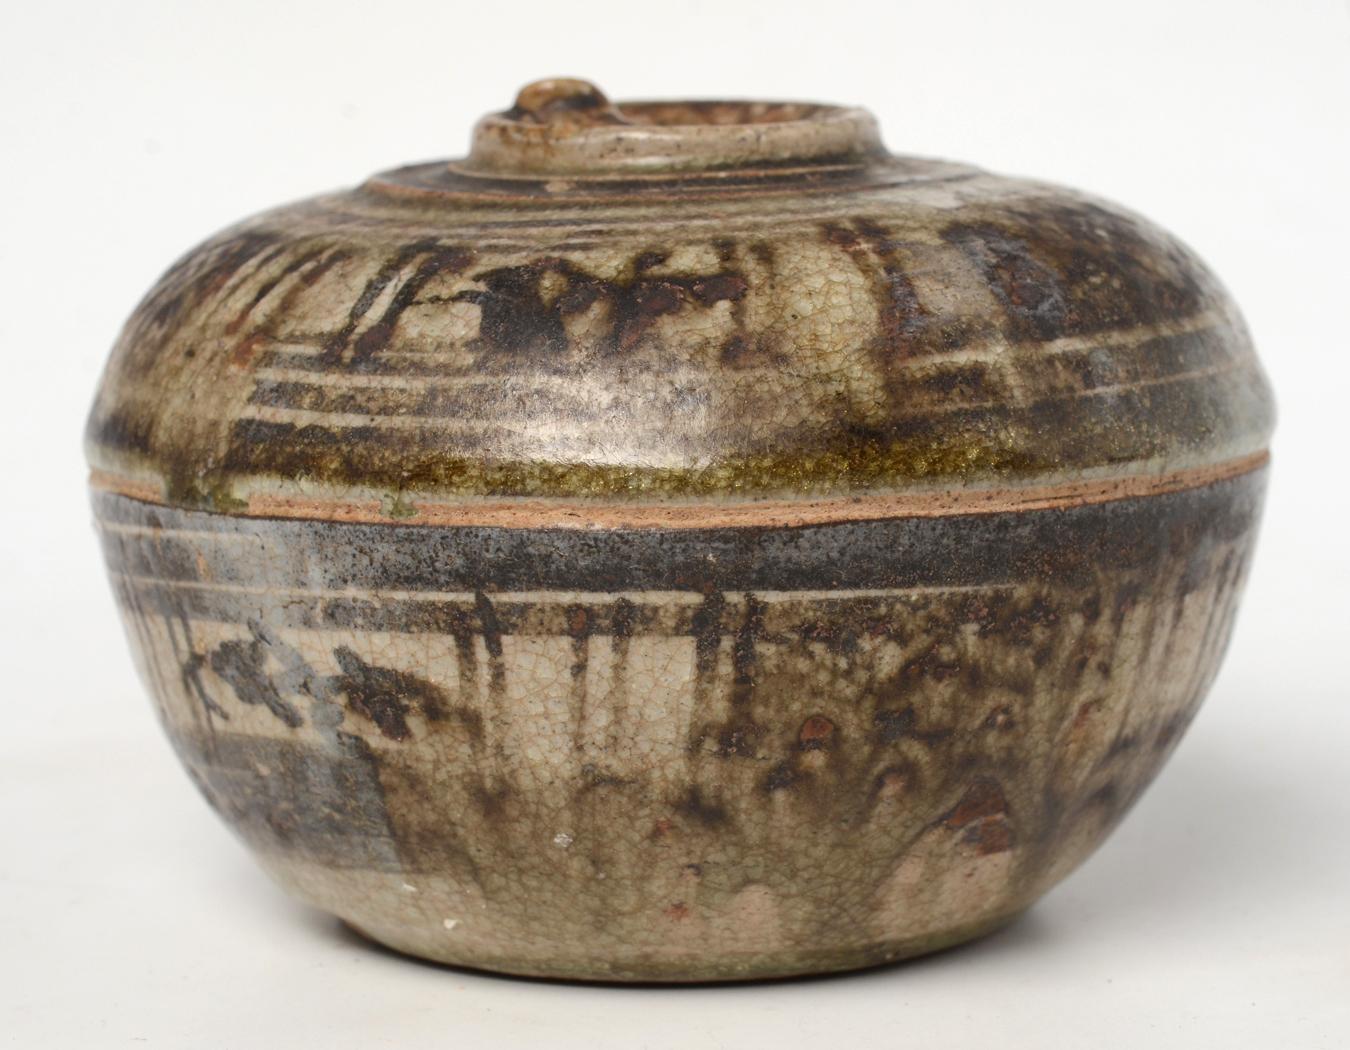 Antique Sukhothai ceramic covered bowl in fruit shape.

Age: Thailand, Sukhothai Period, 14th - 16th Century
Size: Height 7.6 C.M. / Width 11.3 C.M.
Condition: Nice glaze and condition overall, the cover is stuck with body (cannot open) due to long